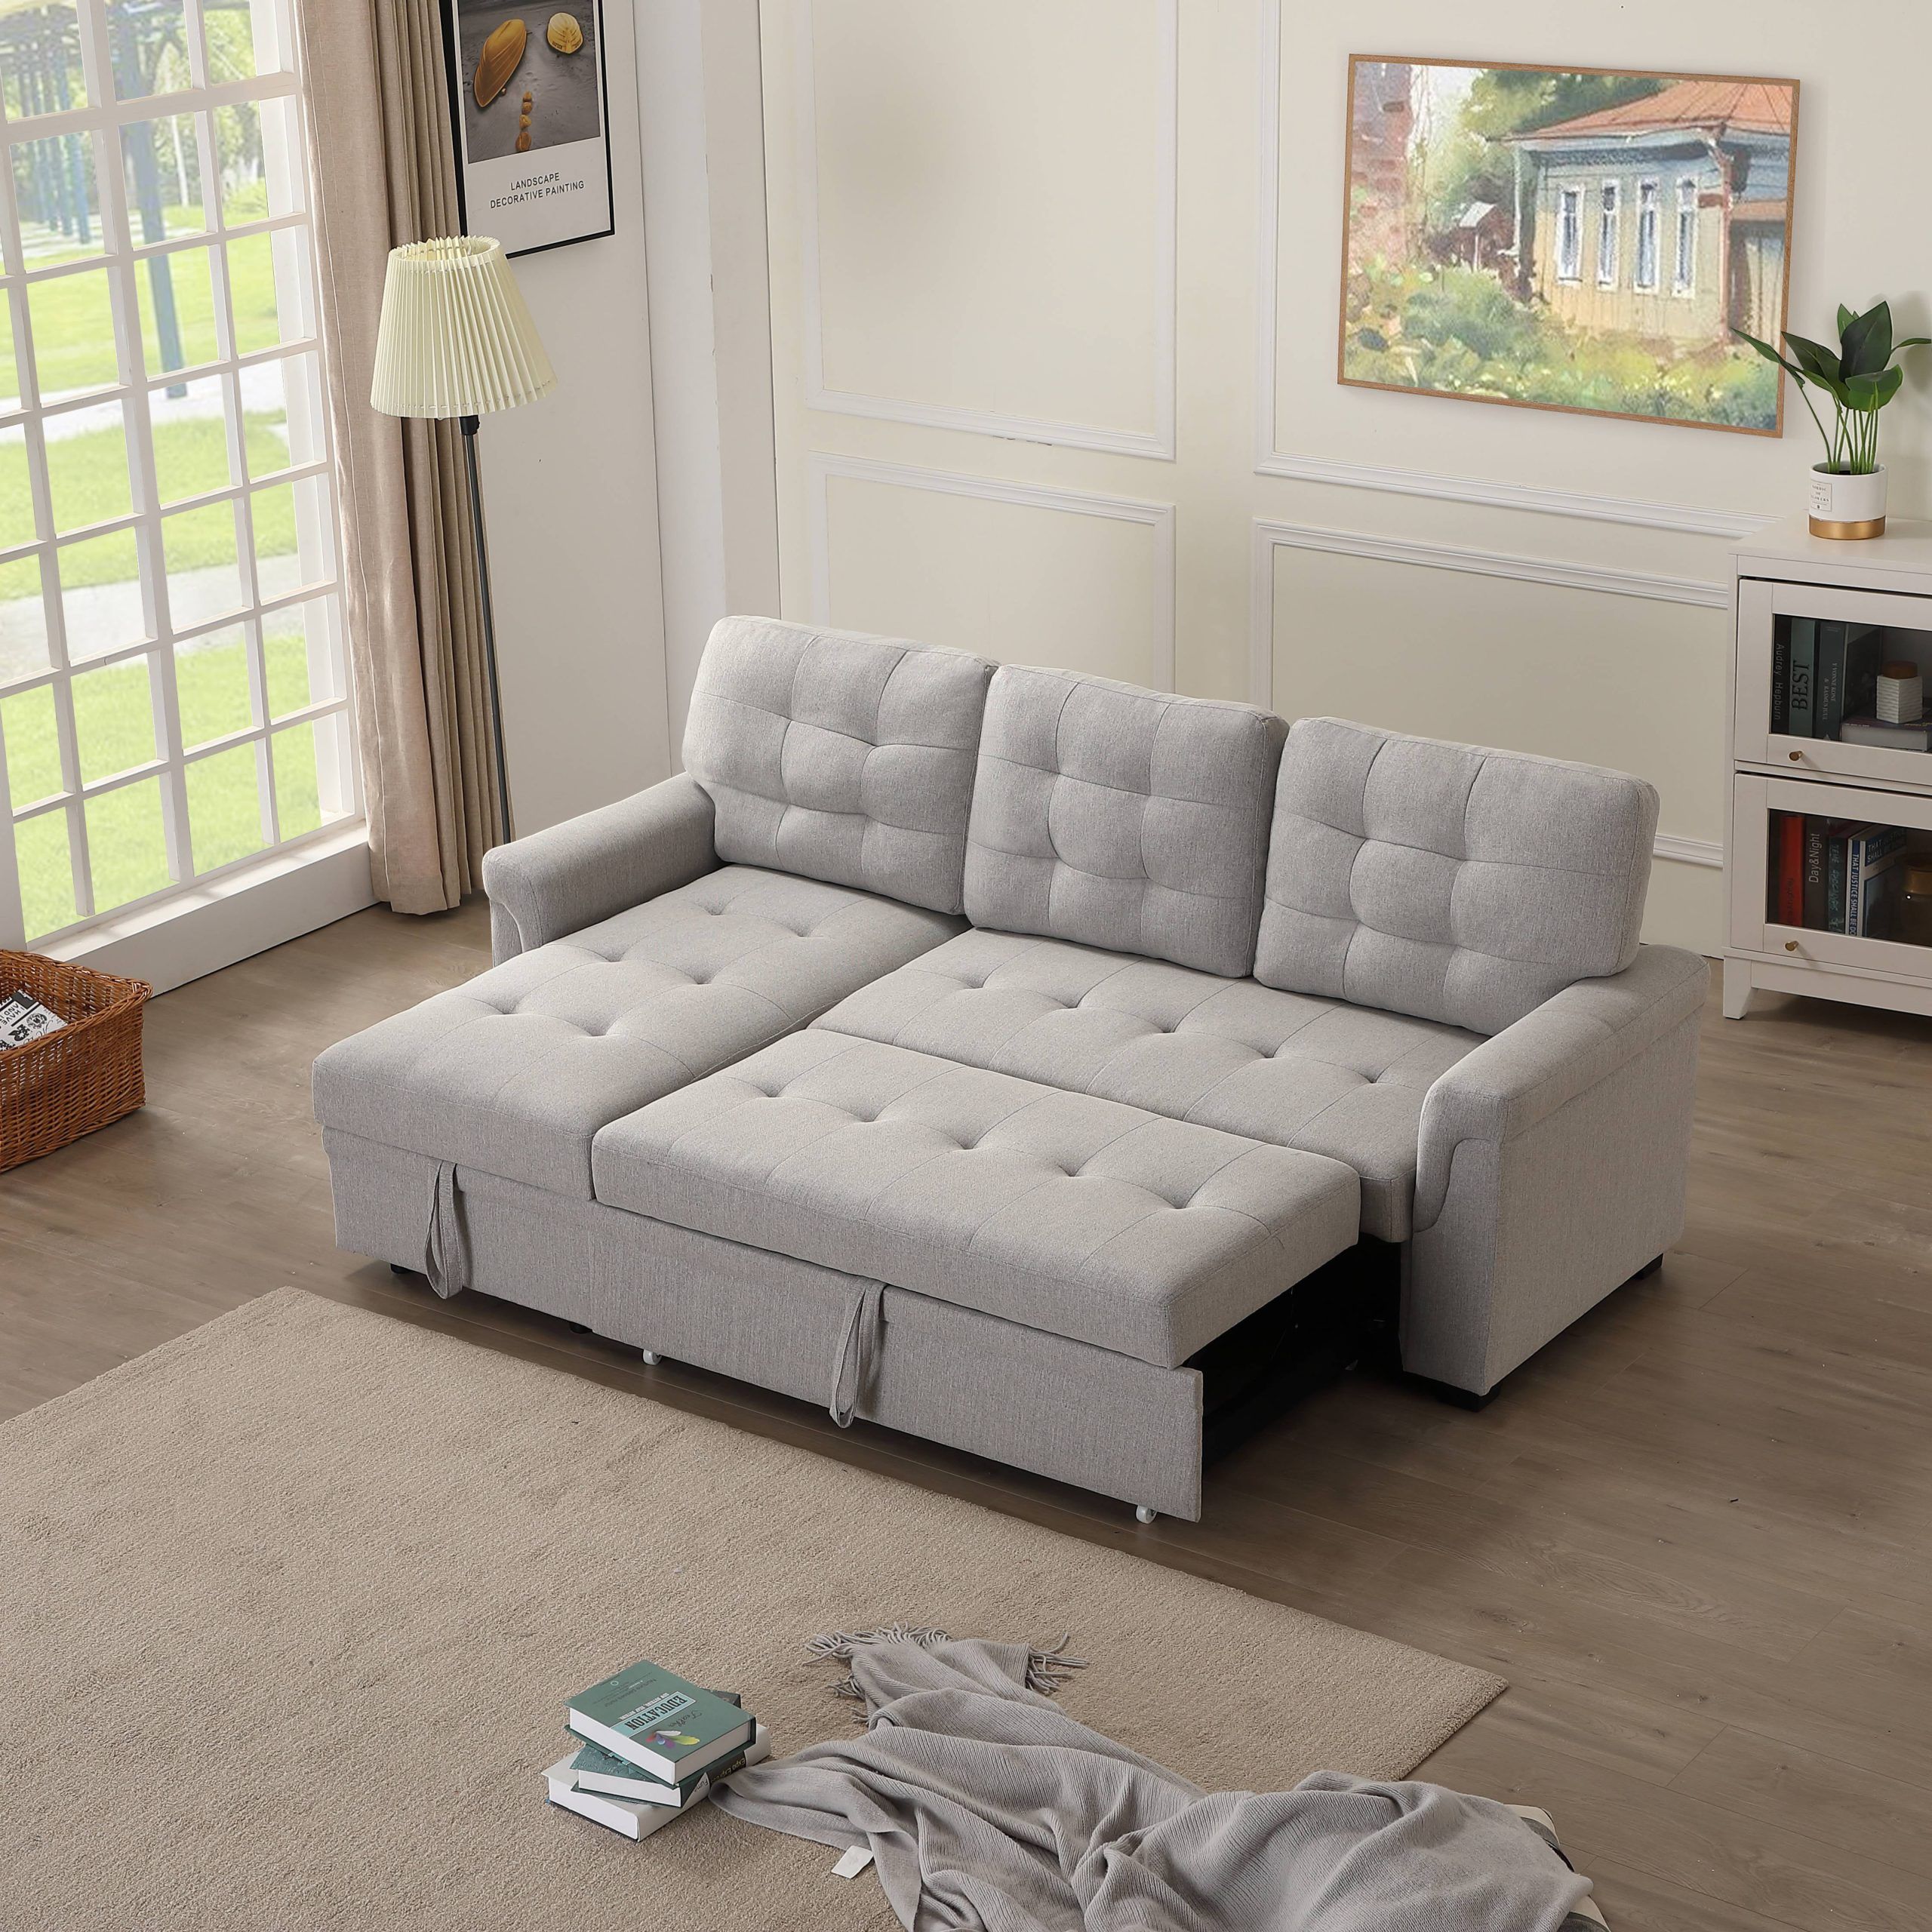 Clearance! 86"w L Shape Sectional Sofa With Reversible Chaise, Mid With Regard To Best And Newest L Shape Couches With Reversible Chaises (View 4 of 15)